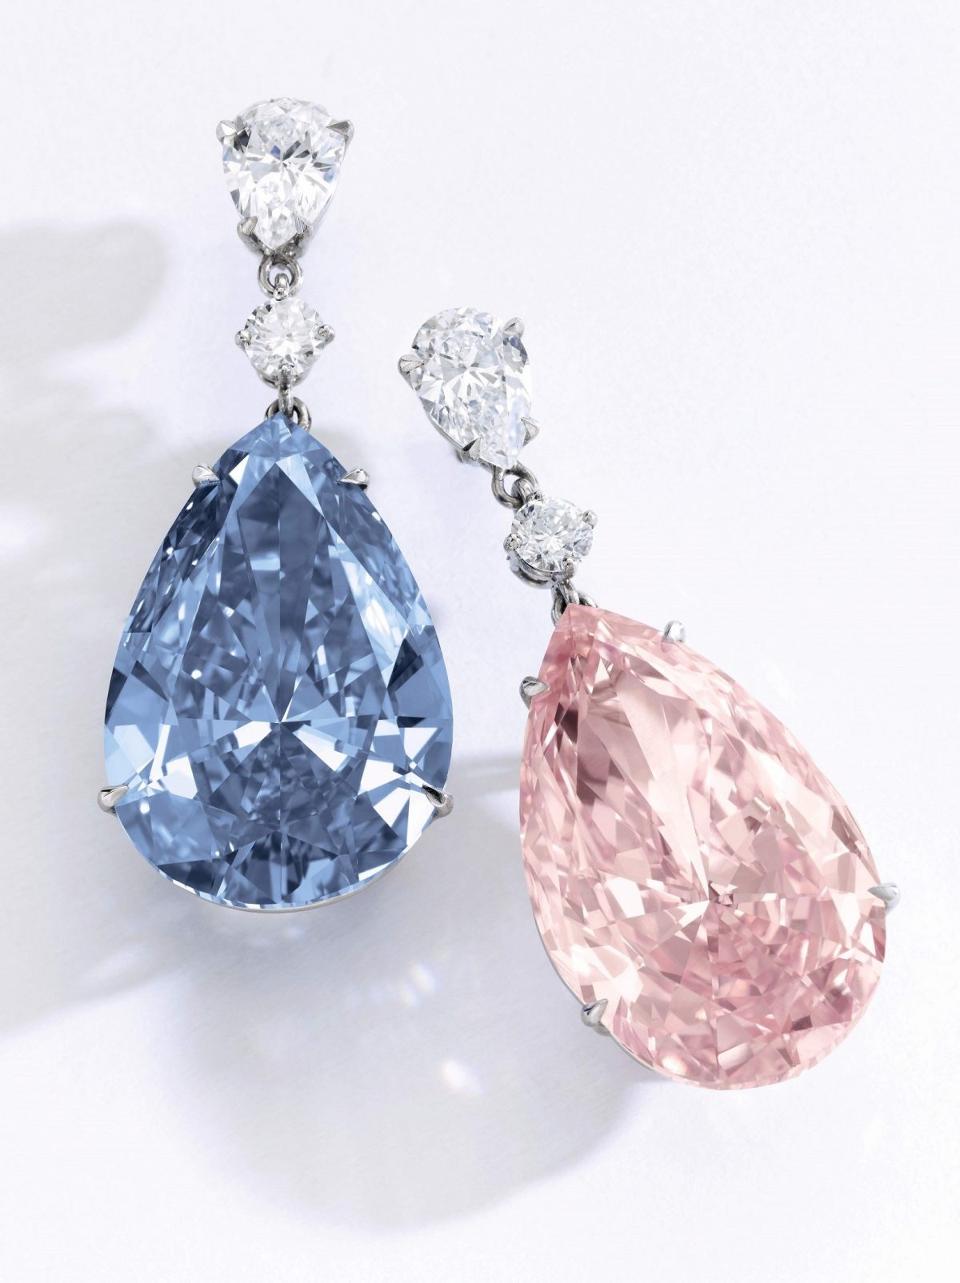 Apollo blue and Artemis Pink earrings.